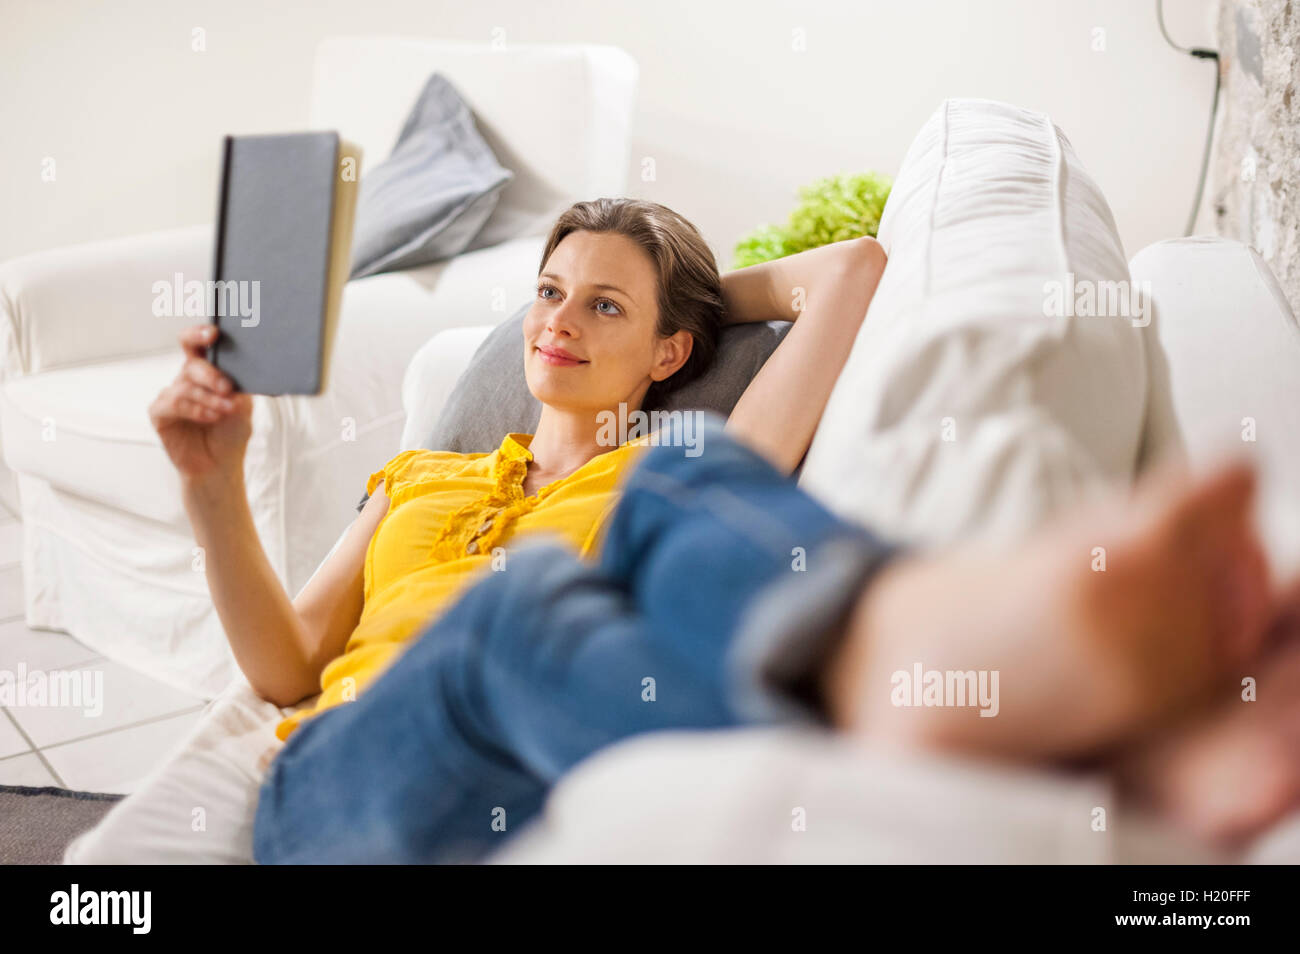 Woman lying on couch, reading a book Stock Photo